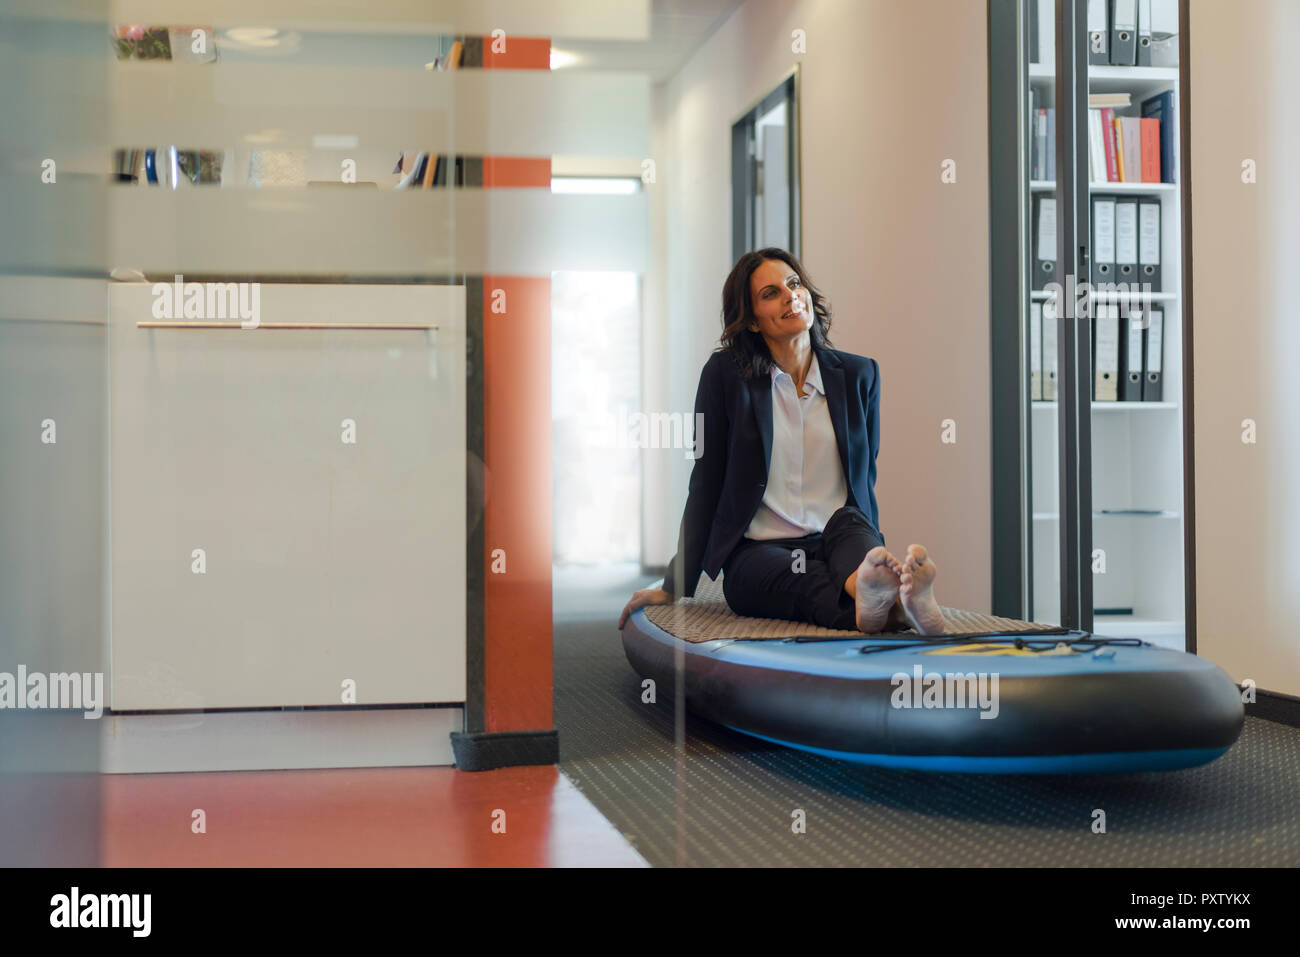 Businesswoman sitting on paddle board, daydreaming in office Banque D'Images